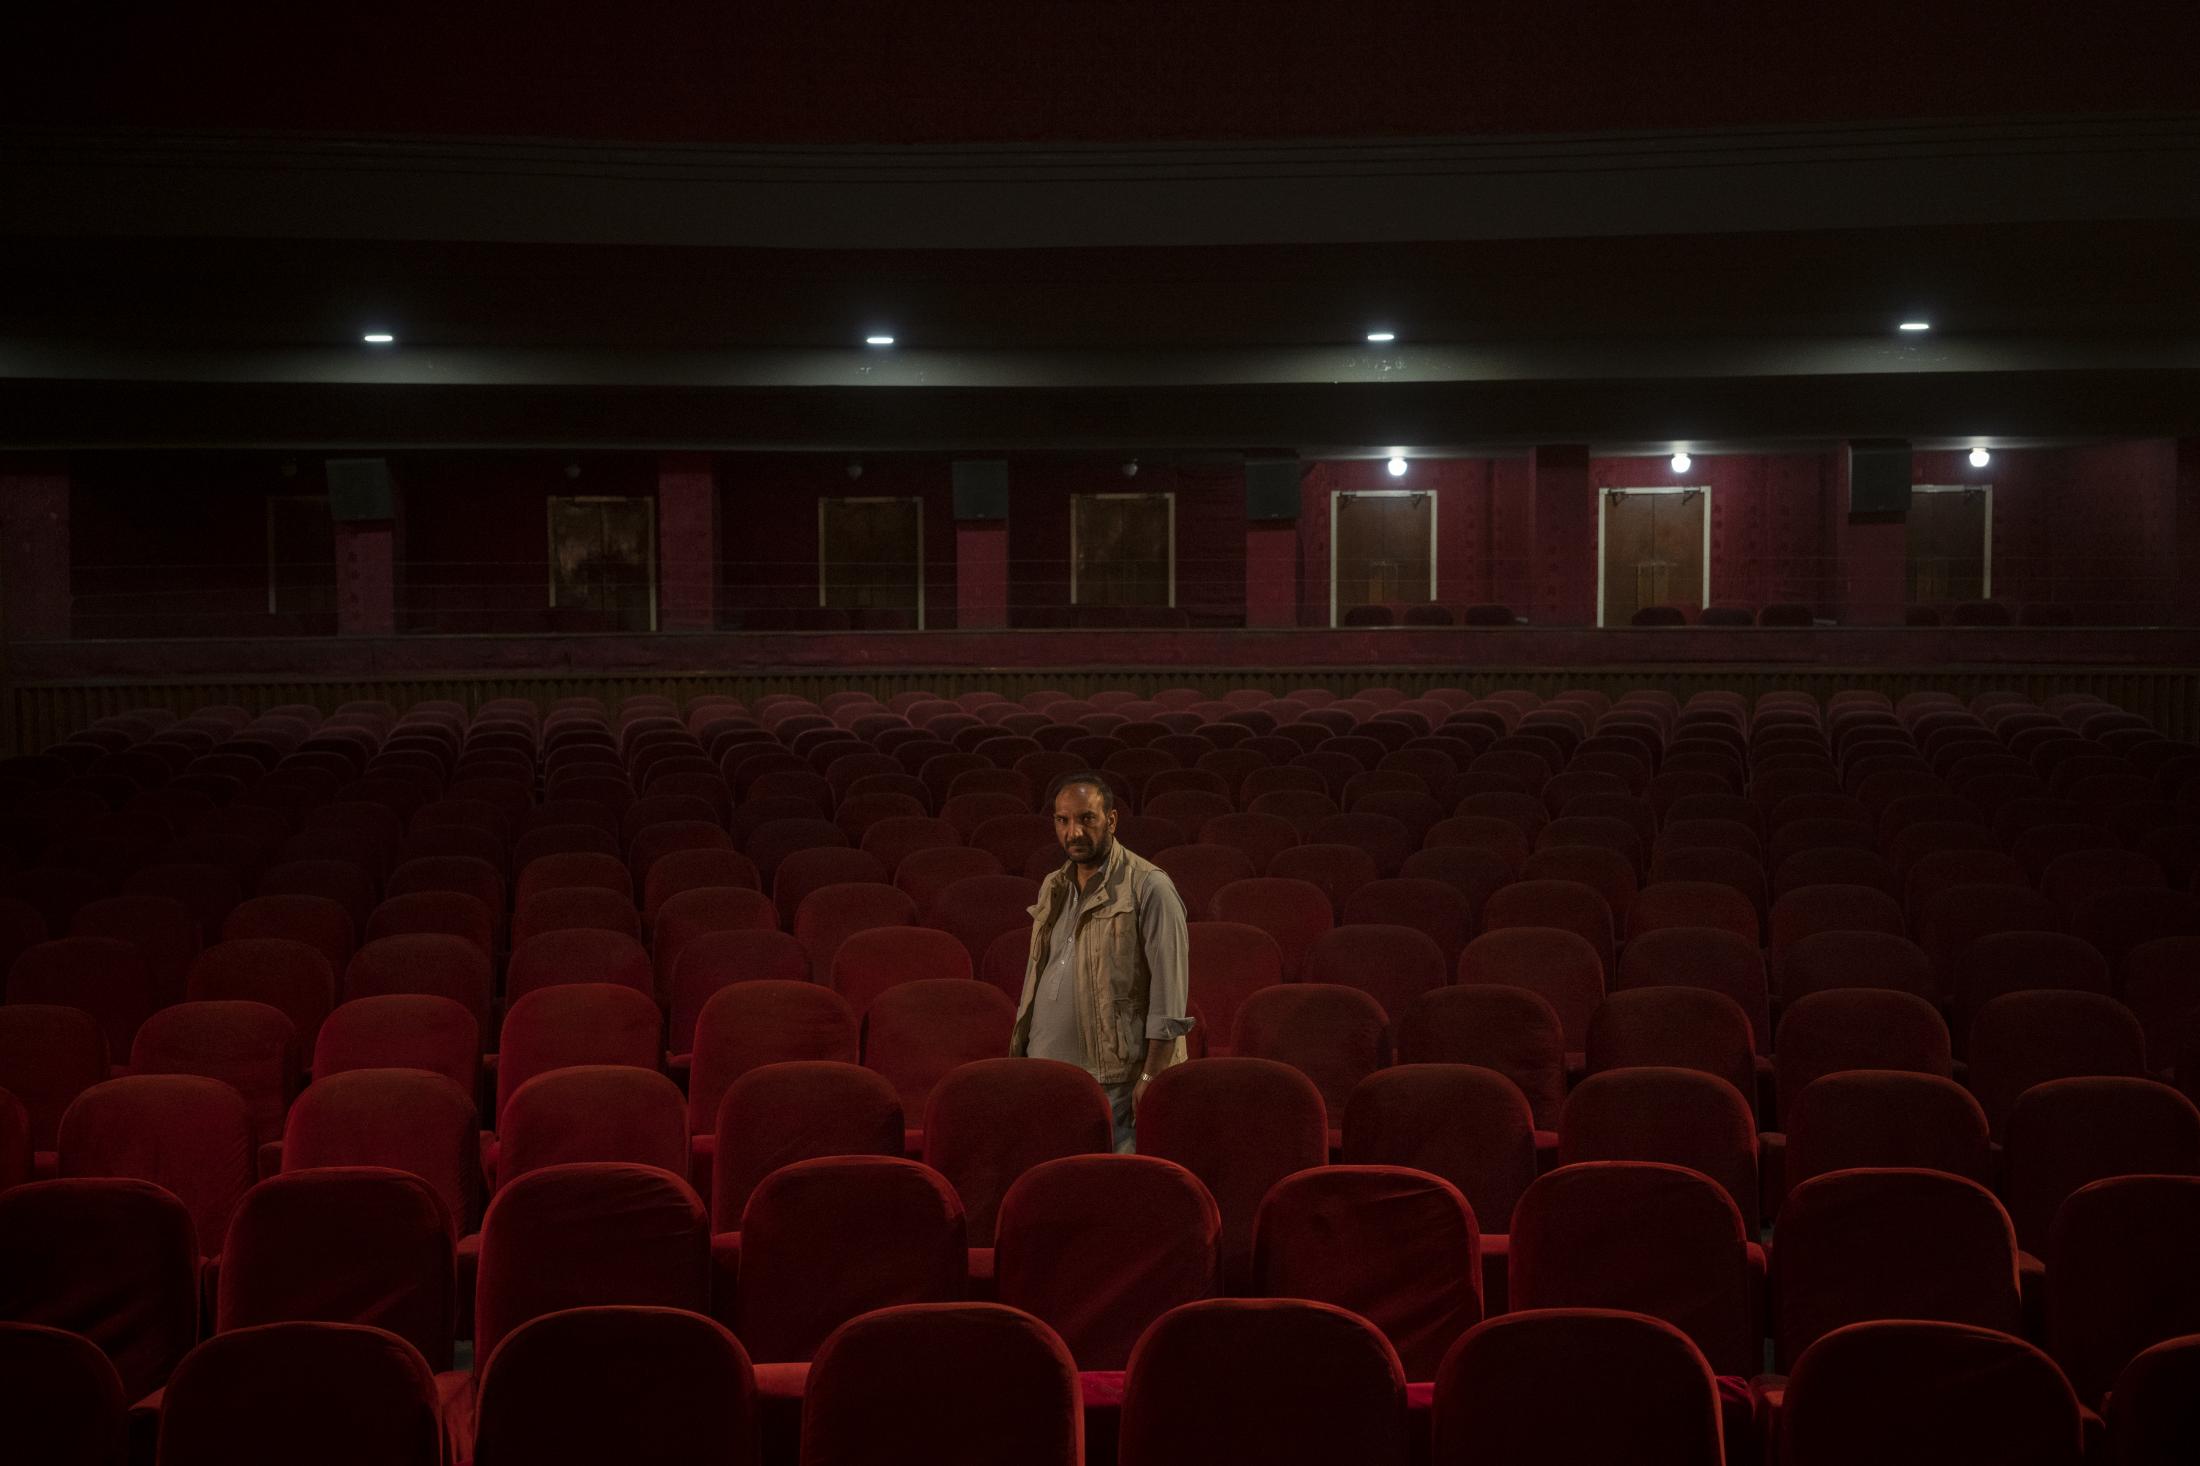 The Cinema of Kabul - Gul Mohammed, who works as a host in the Ariana Cinema,...